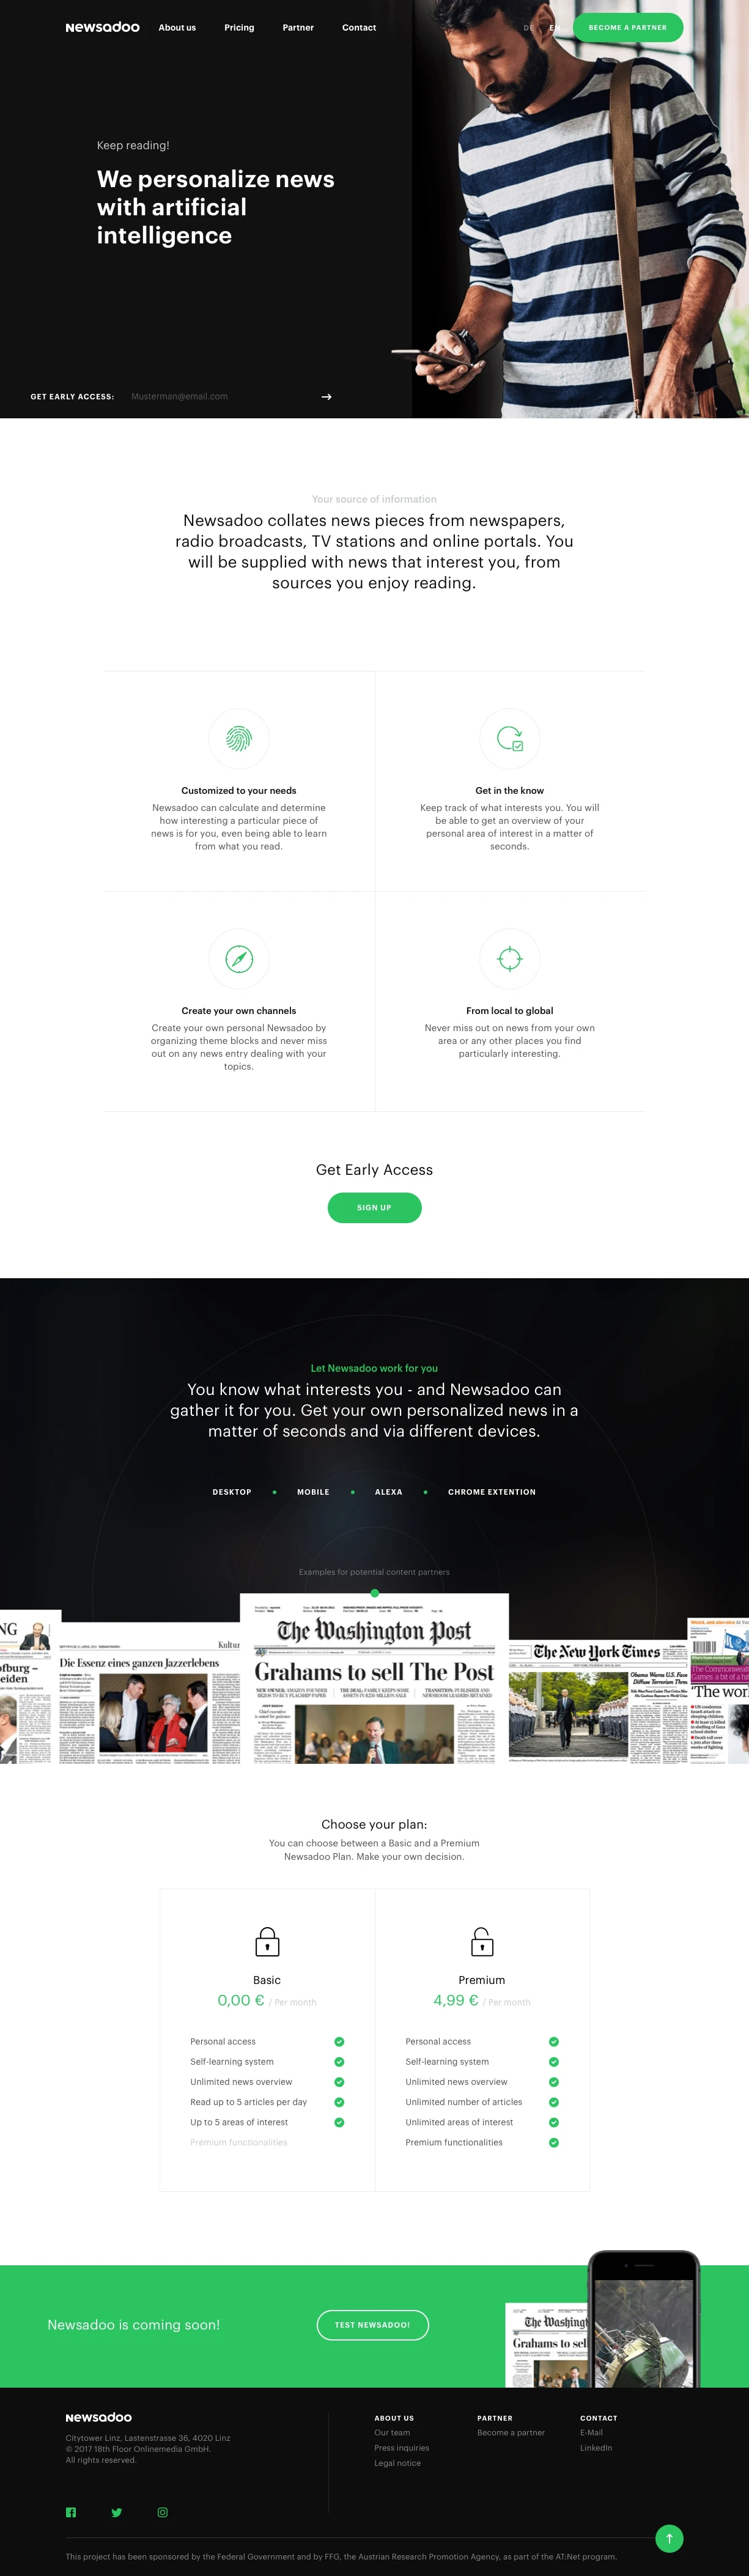 Newsadoo Landing Page Example: Collates news pieces from newspapers, radio broadcasts, TV stations and online portals. You will be supplied with news that interest you, from sources you enjoy reading.